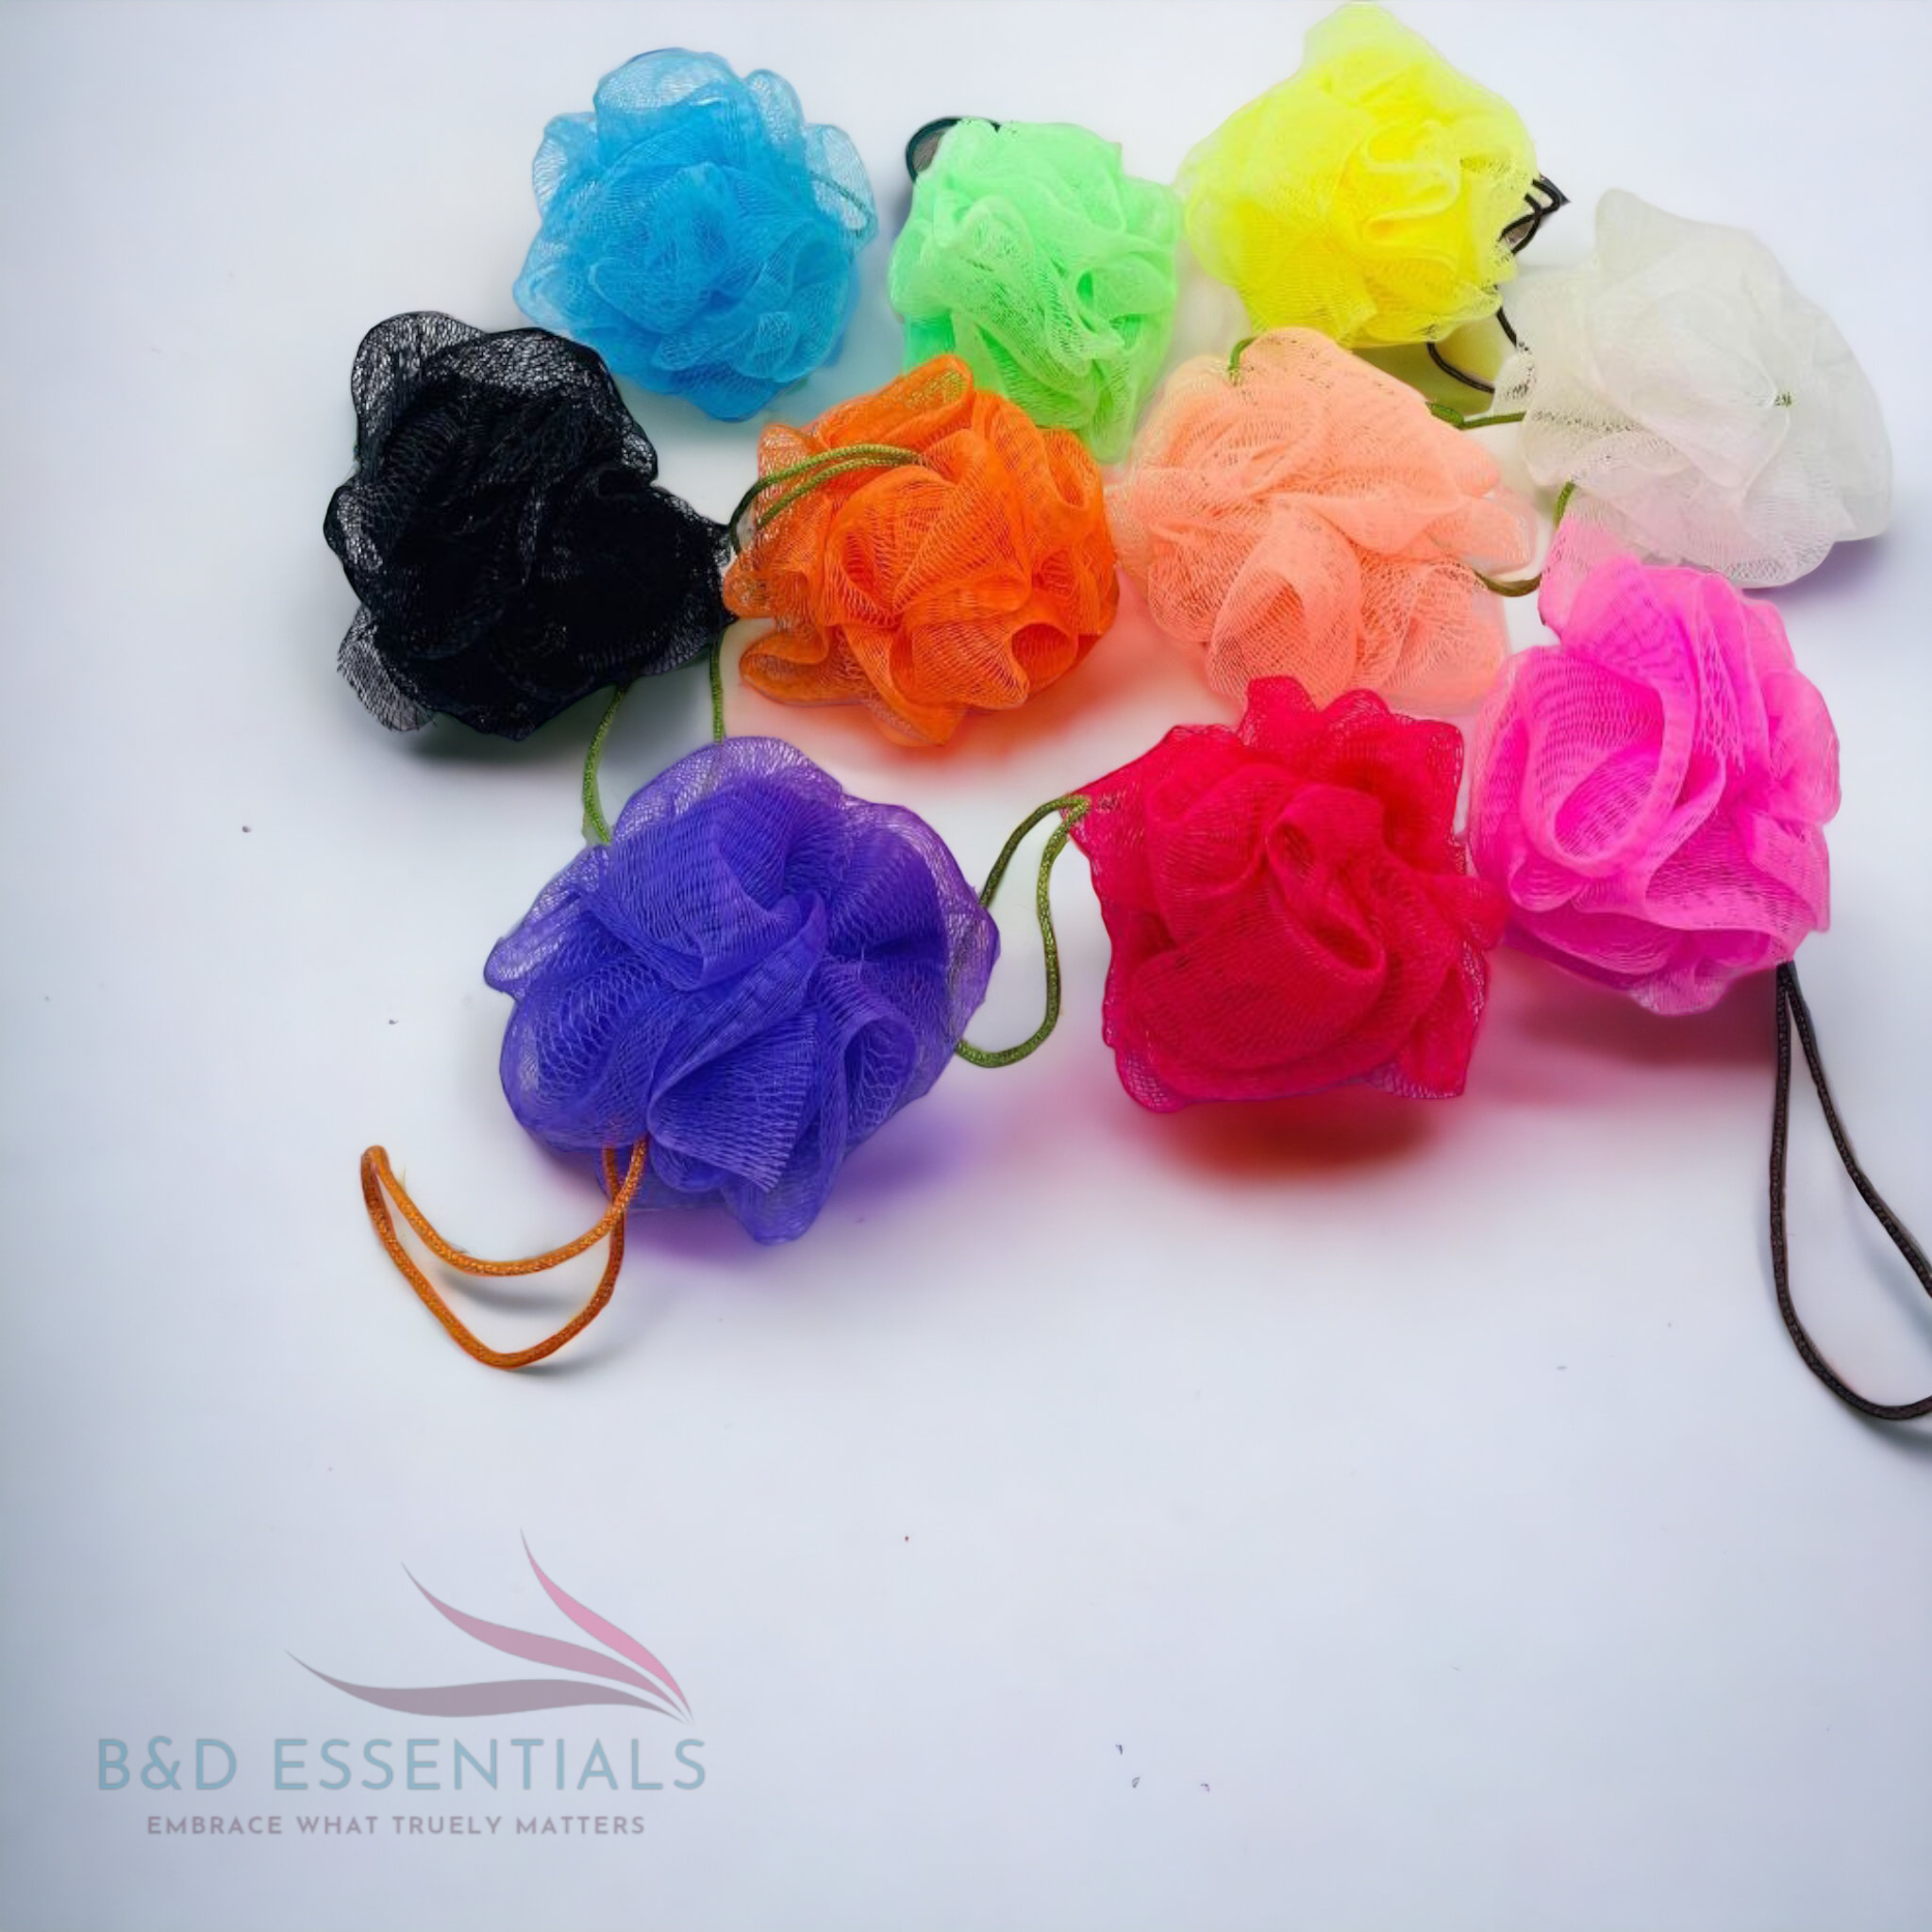 Vibrant Color Burst: Luxury Bath Loofah for a Refreshing Cleanse